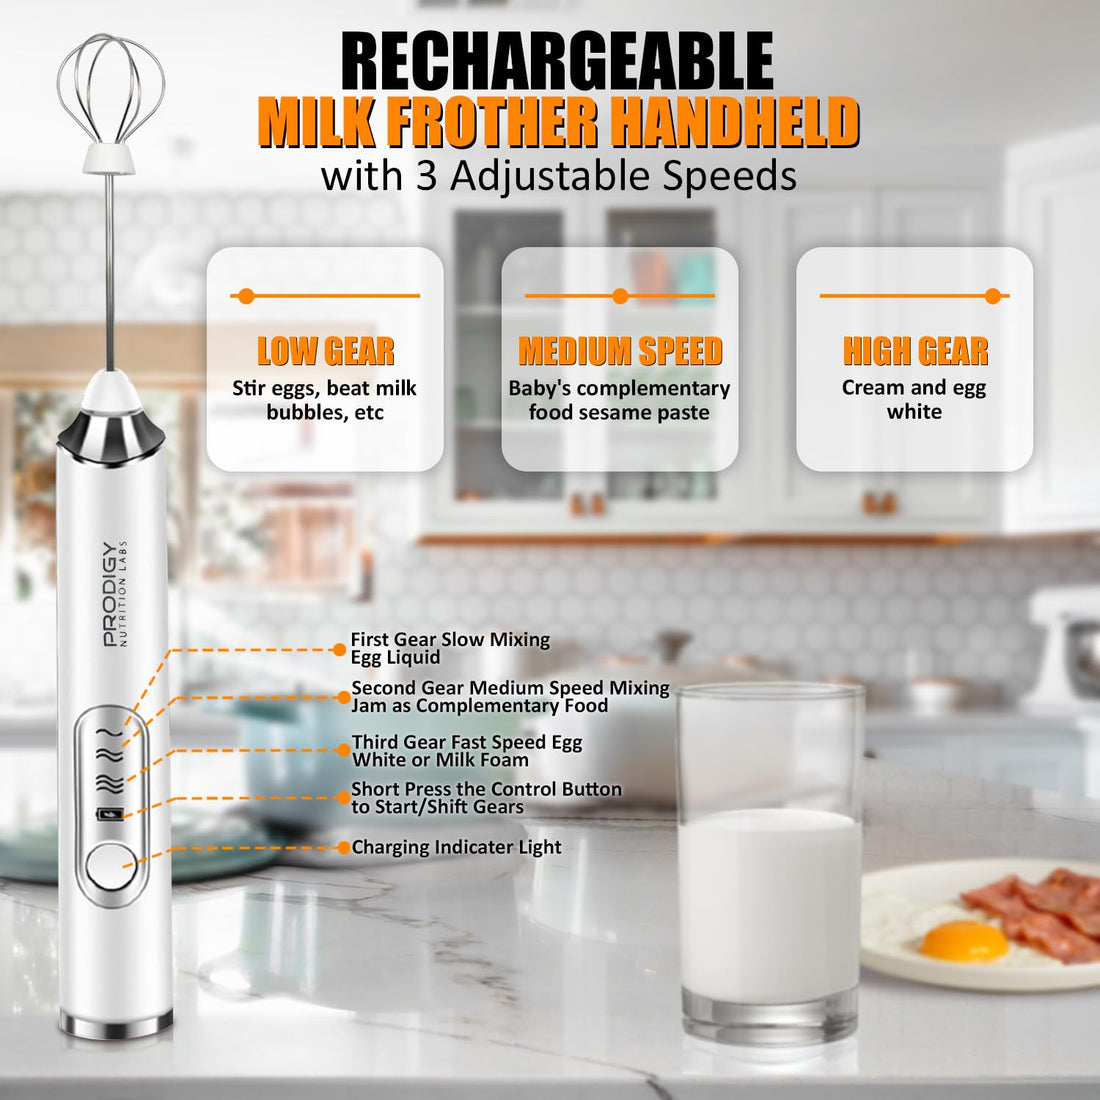 Rechargeable Milk Frother Handheld with 2 Attachments - Handheld Silver Electric Whisk Drink Foam Mixer, Mini Stirrer with 3 Adjustable Speeds for Coffee, Lattes, Shakes, and Eggs